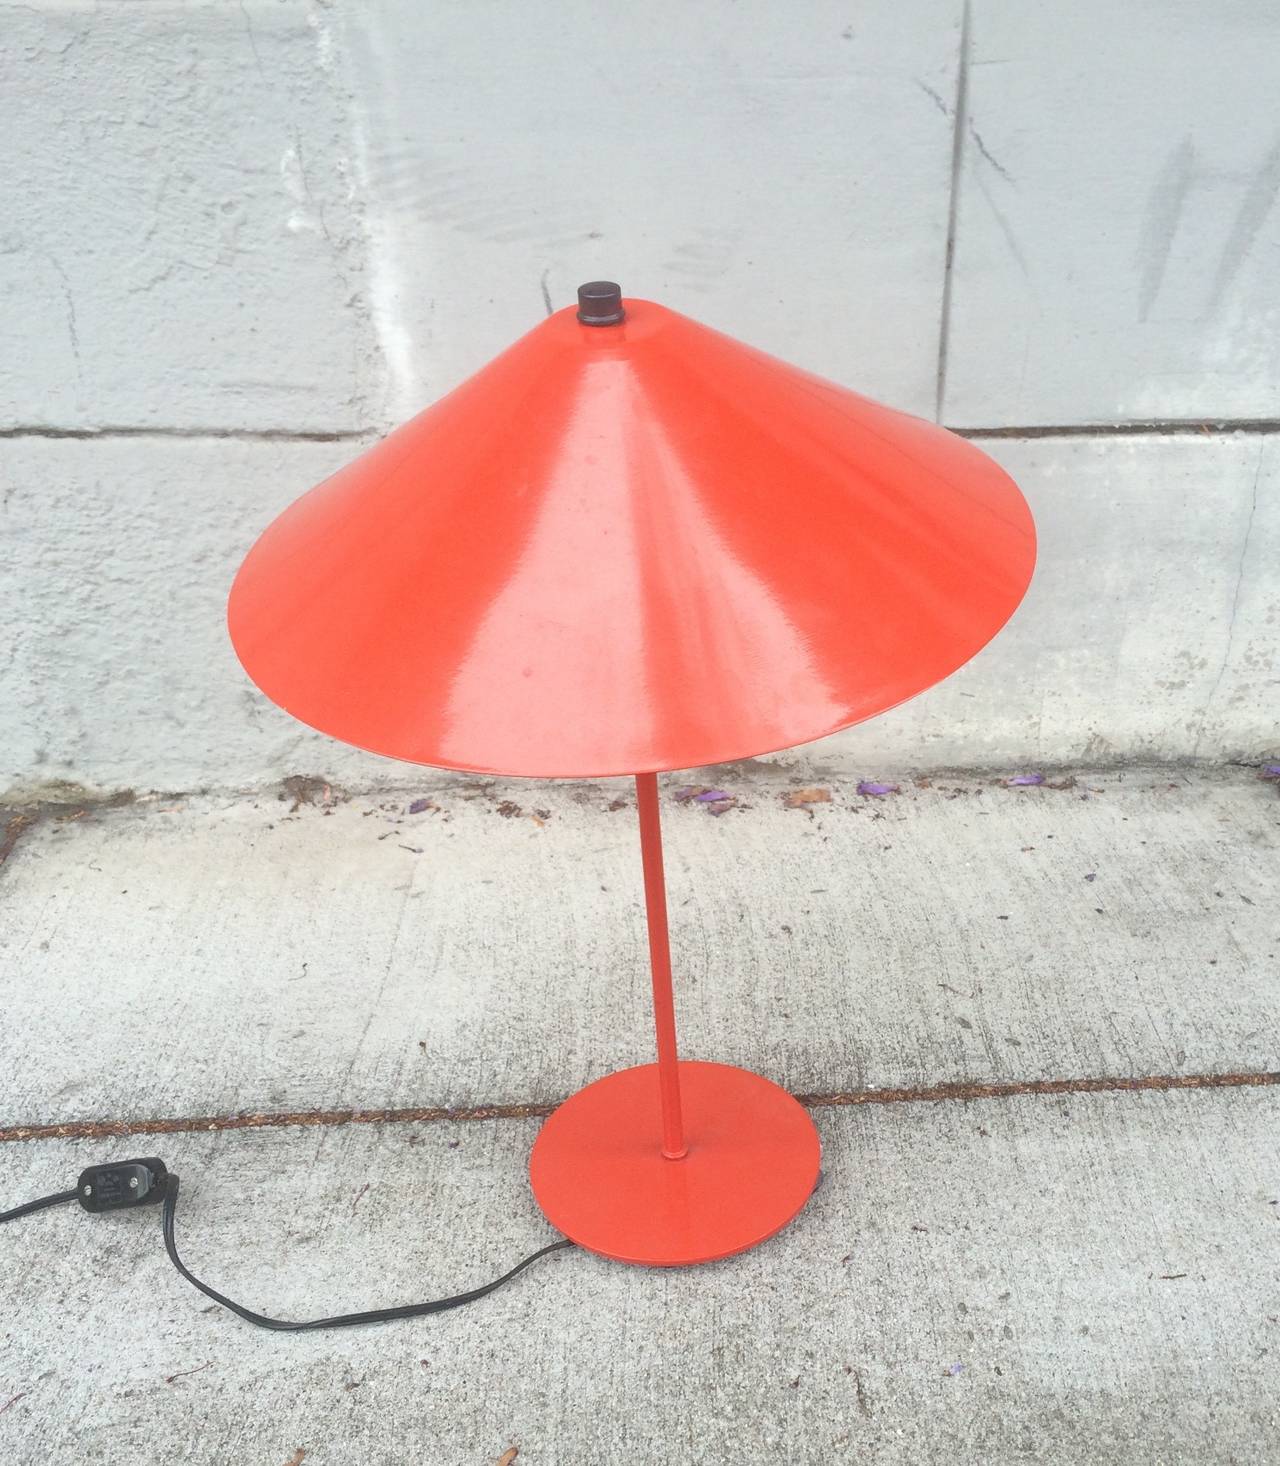 Neo Pop Table Lamp
painted metal base, and metal shade
circa 1980
Excellent condition